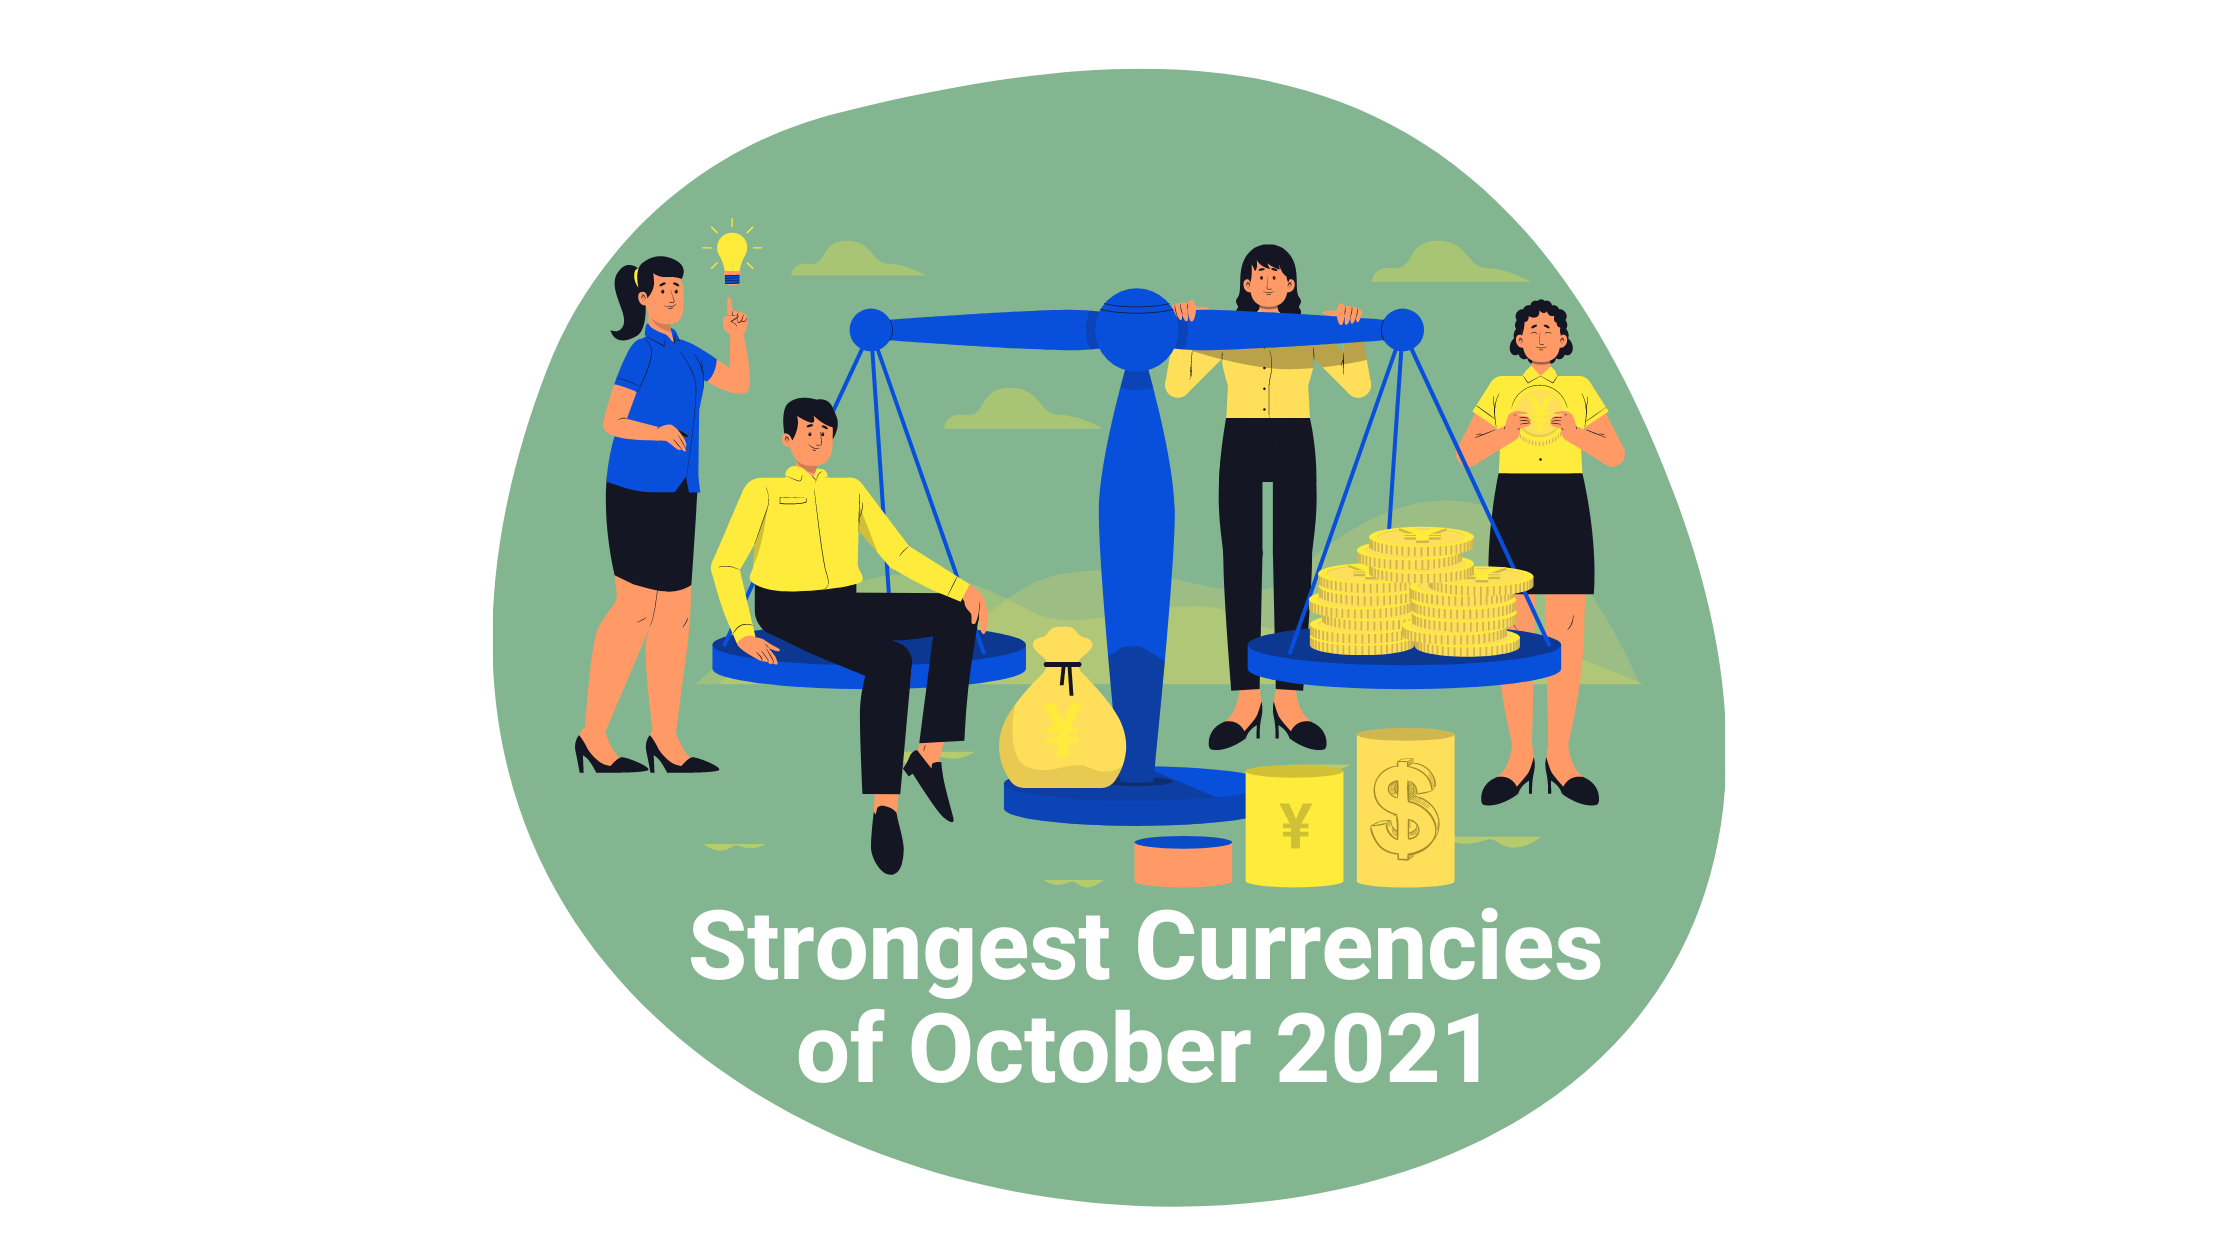 a look at the worlds strongest currencies in October 2021